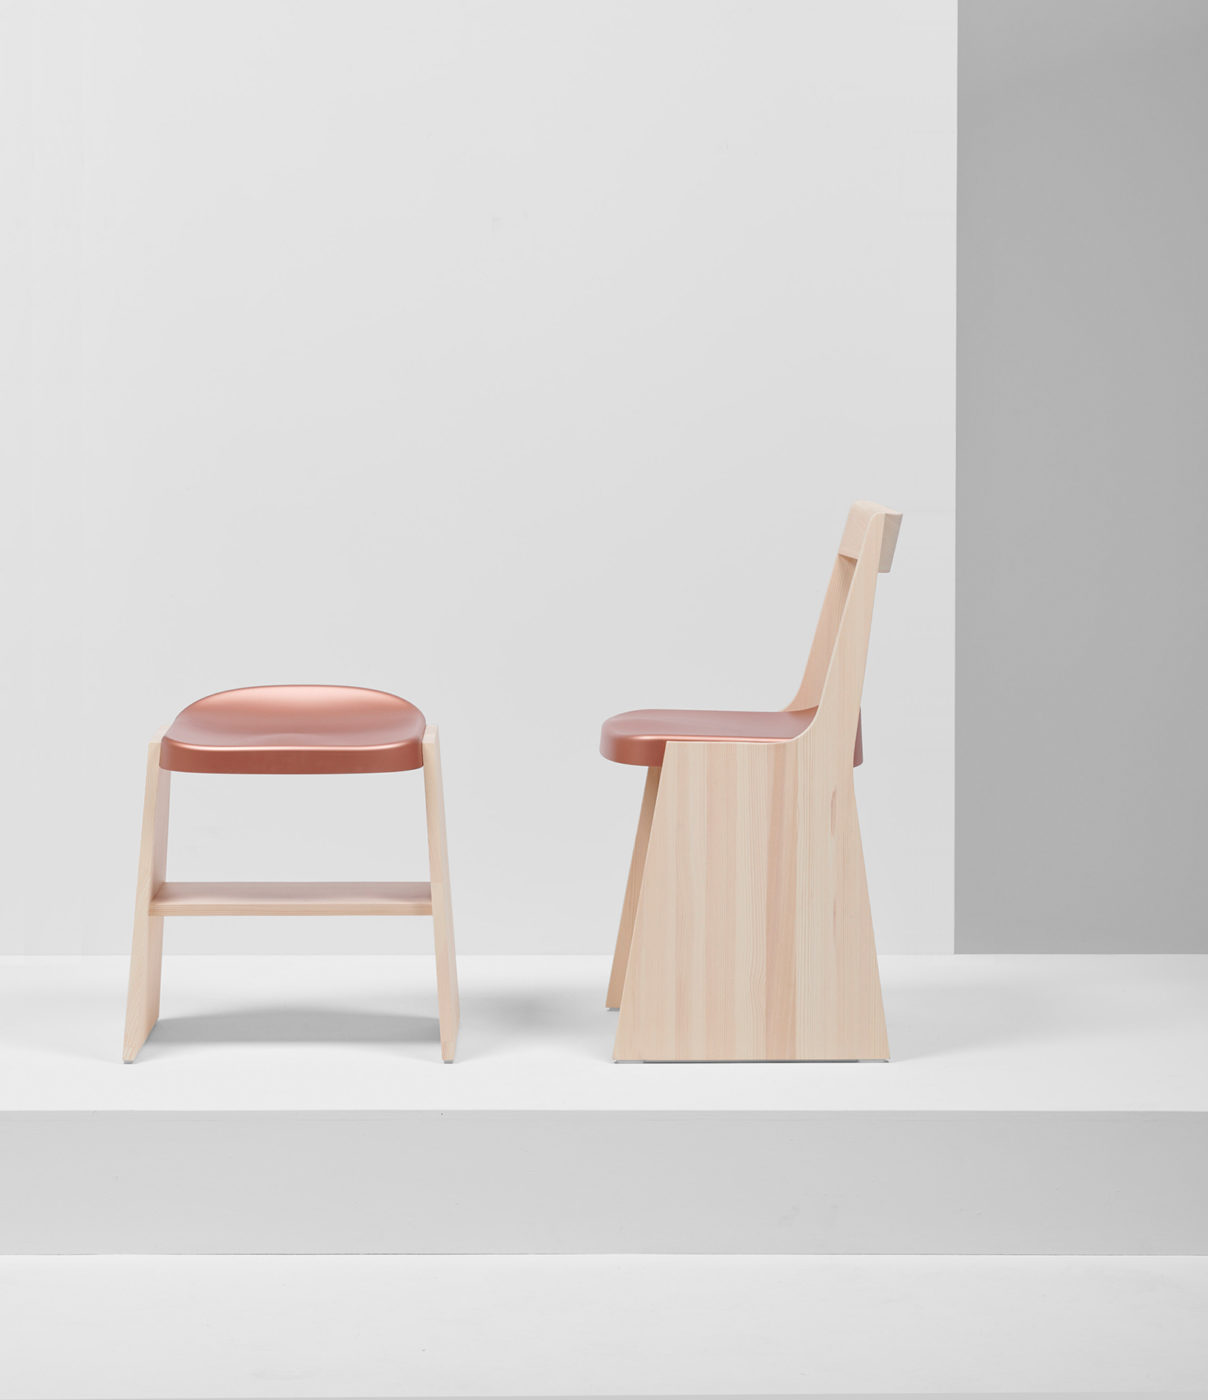 Minimalist Collection of Chairs and Stools by Studio Industrial Facility for Mattiazzi